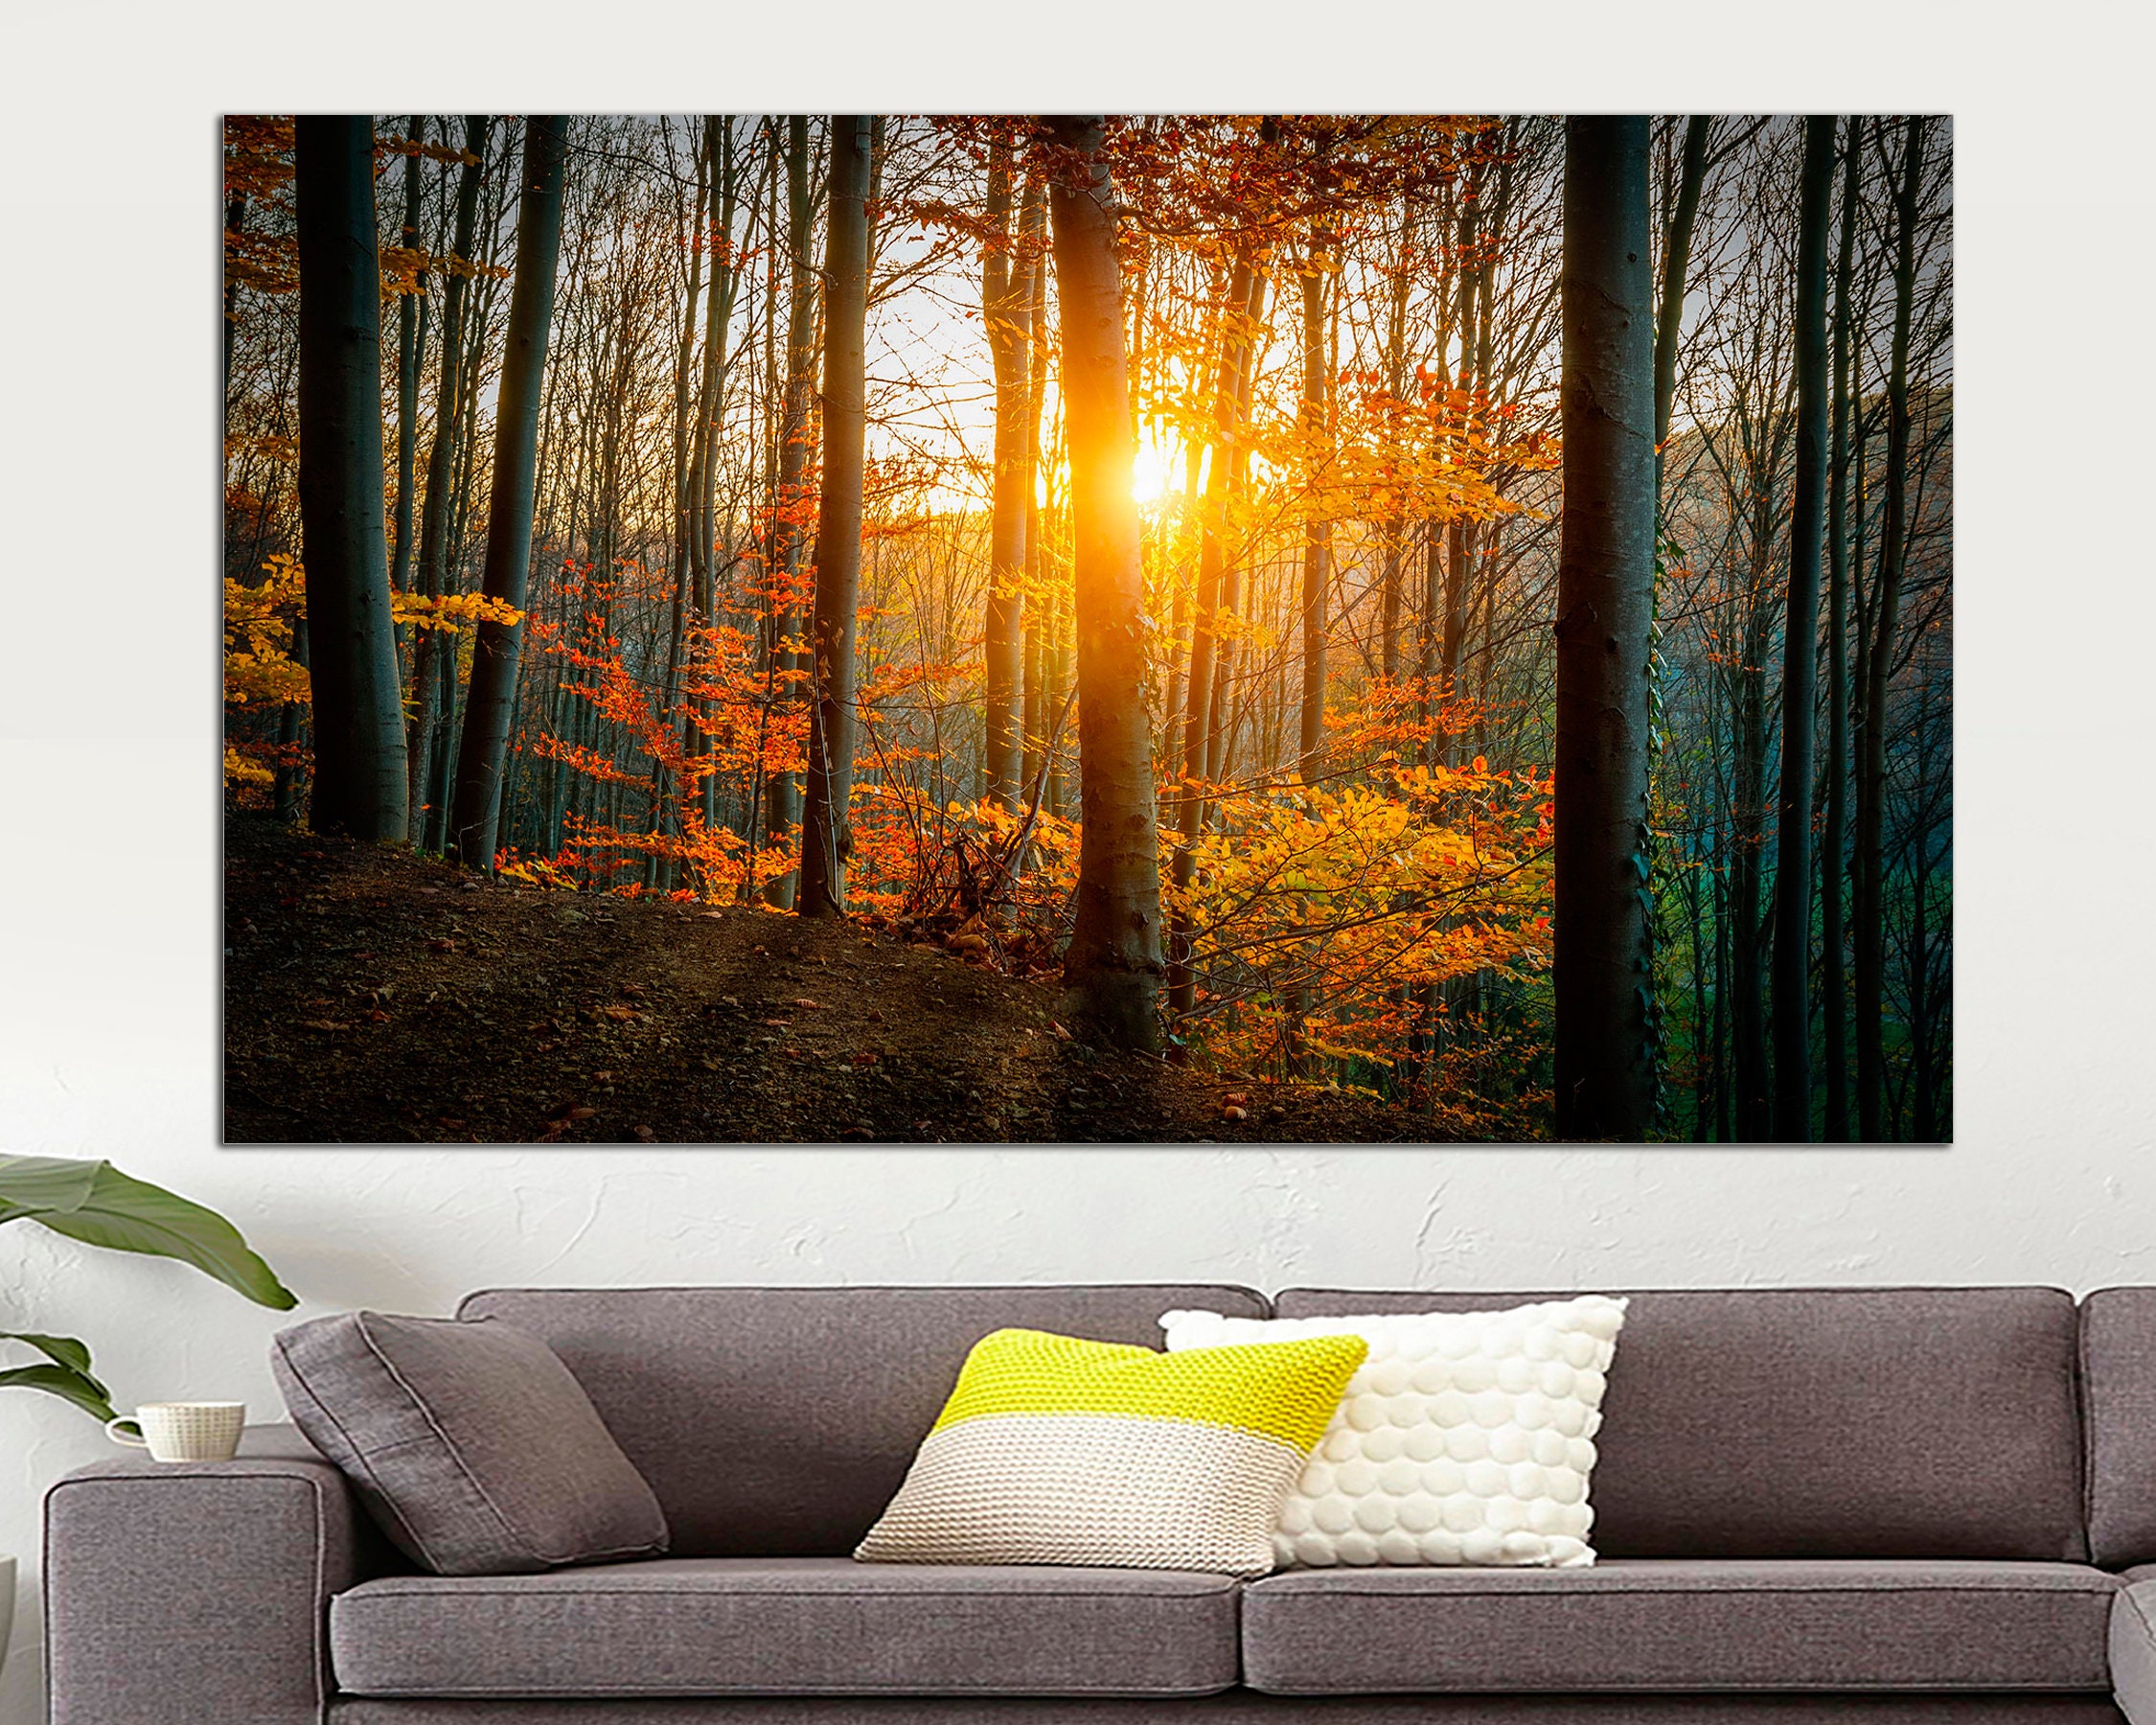 Forest Canvas Autumn Forest Canvas Landscape CanvasTree | Etsy